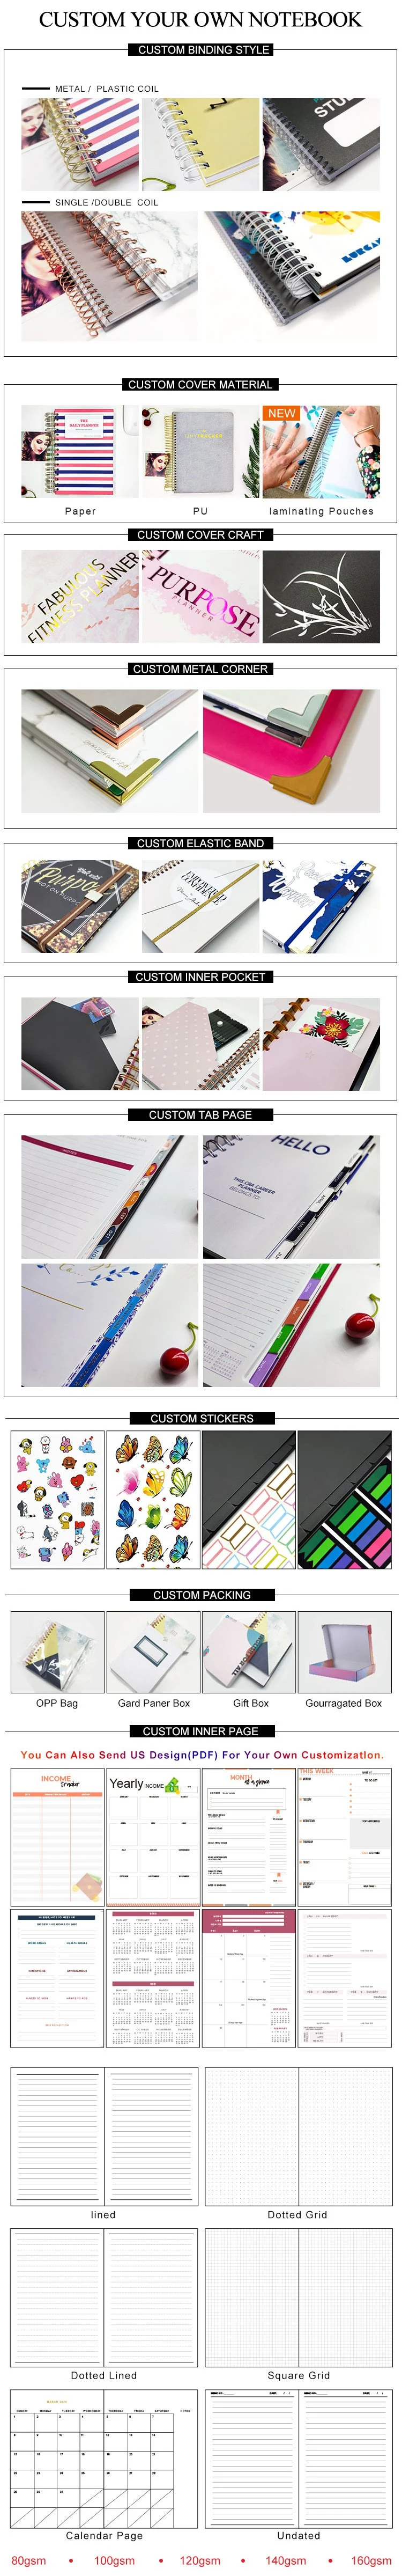 Manufacturer Custom Social Media Content Private Label Journals and Planners